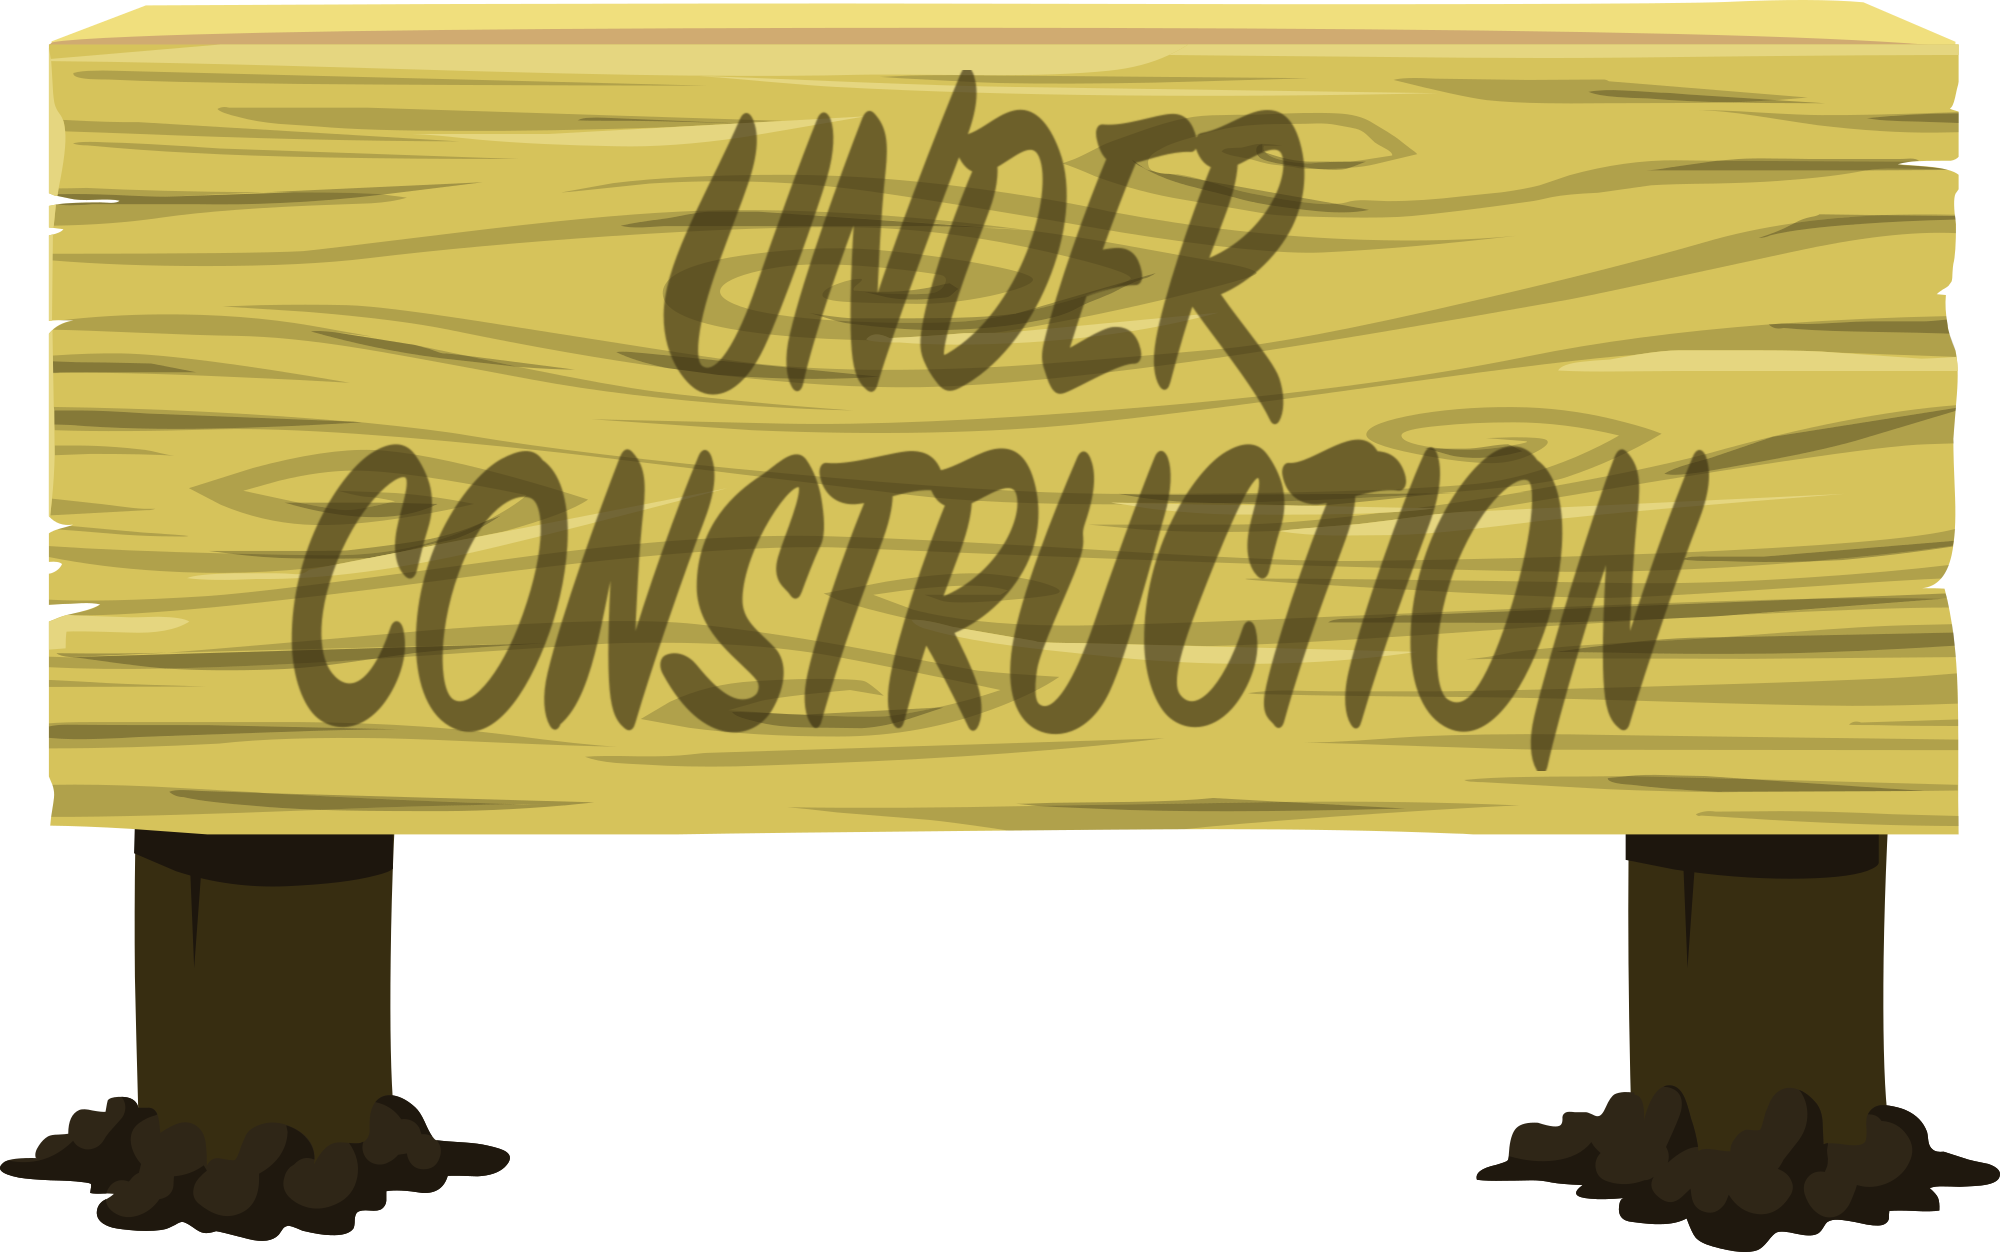 Sign that says Under Construction